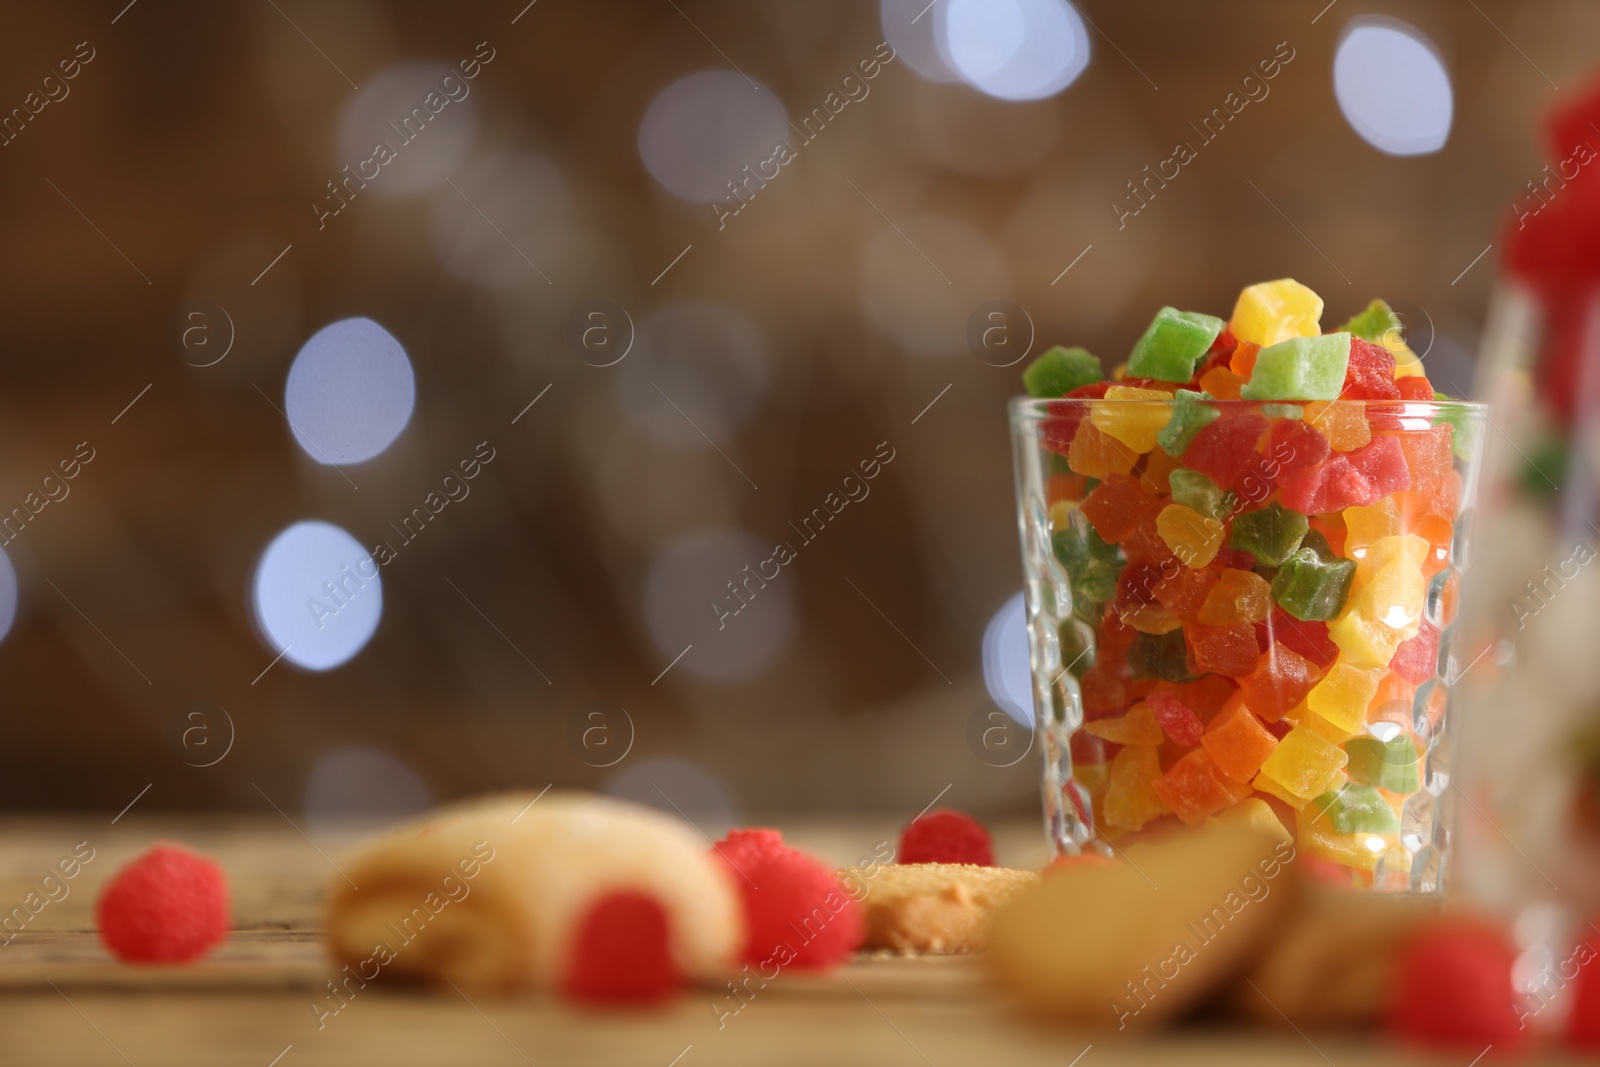 Photo of Delicious candies in glass on table against blurred background, space for text